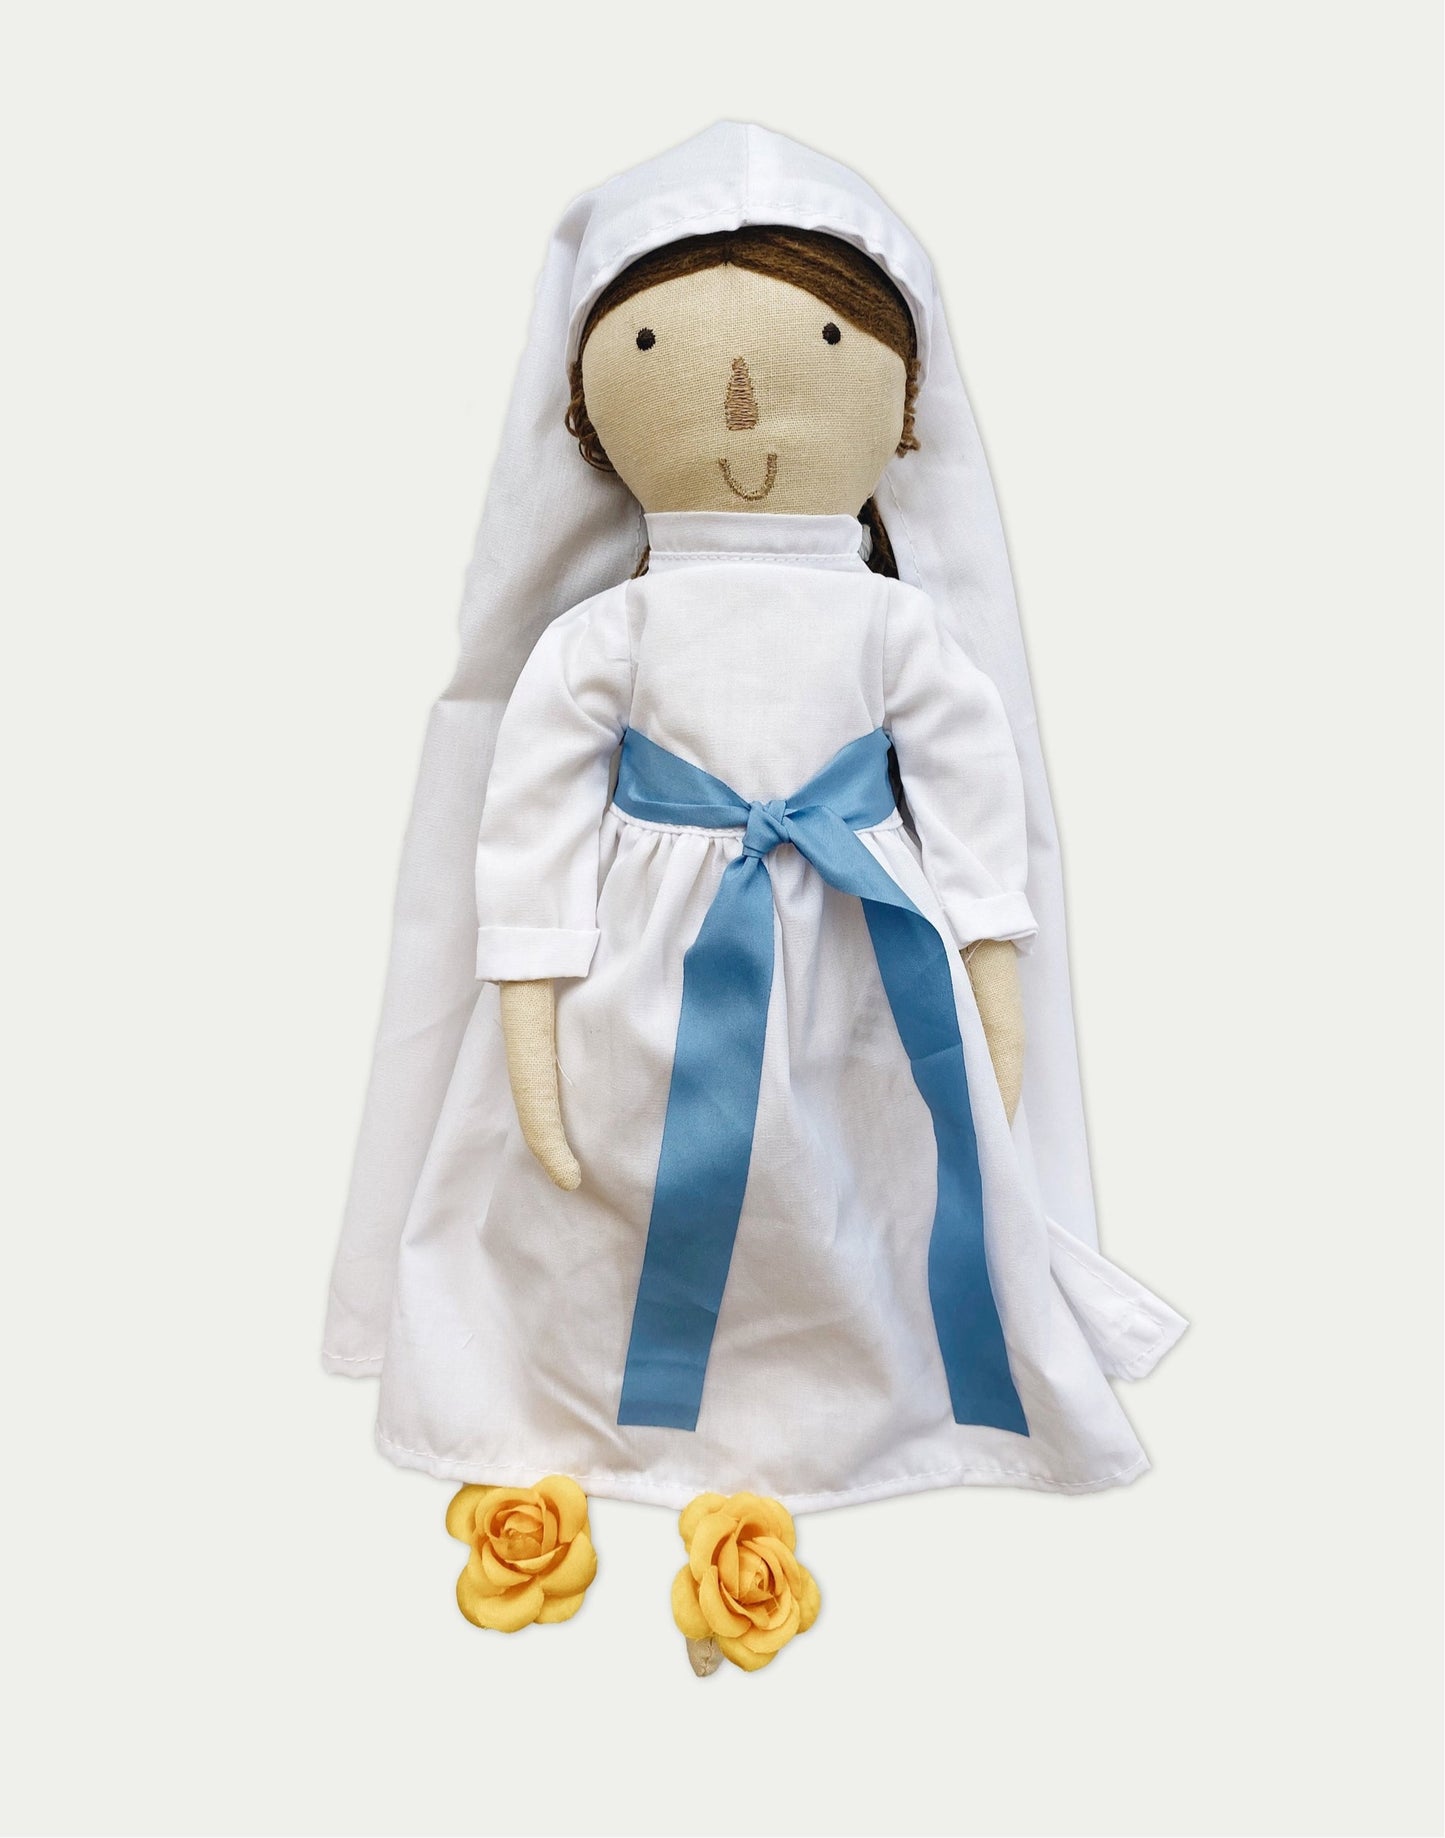 alt="Our Lady of Lourdes Doll Outfit Kit"